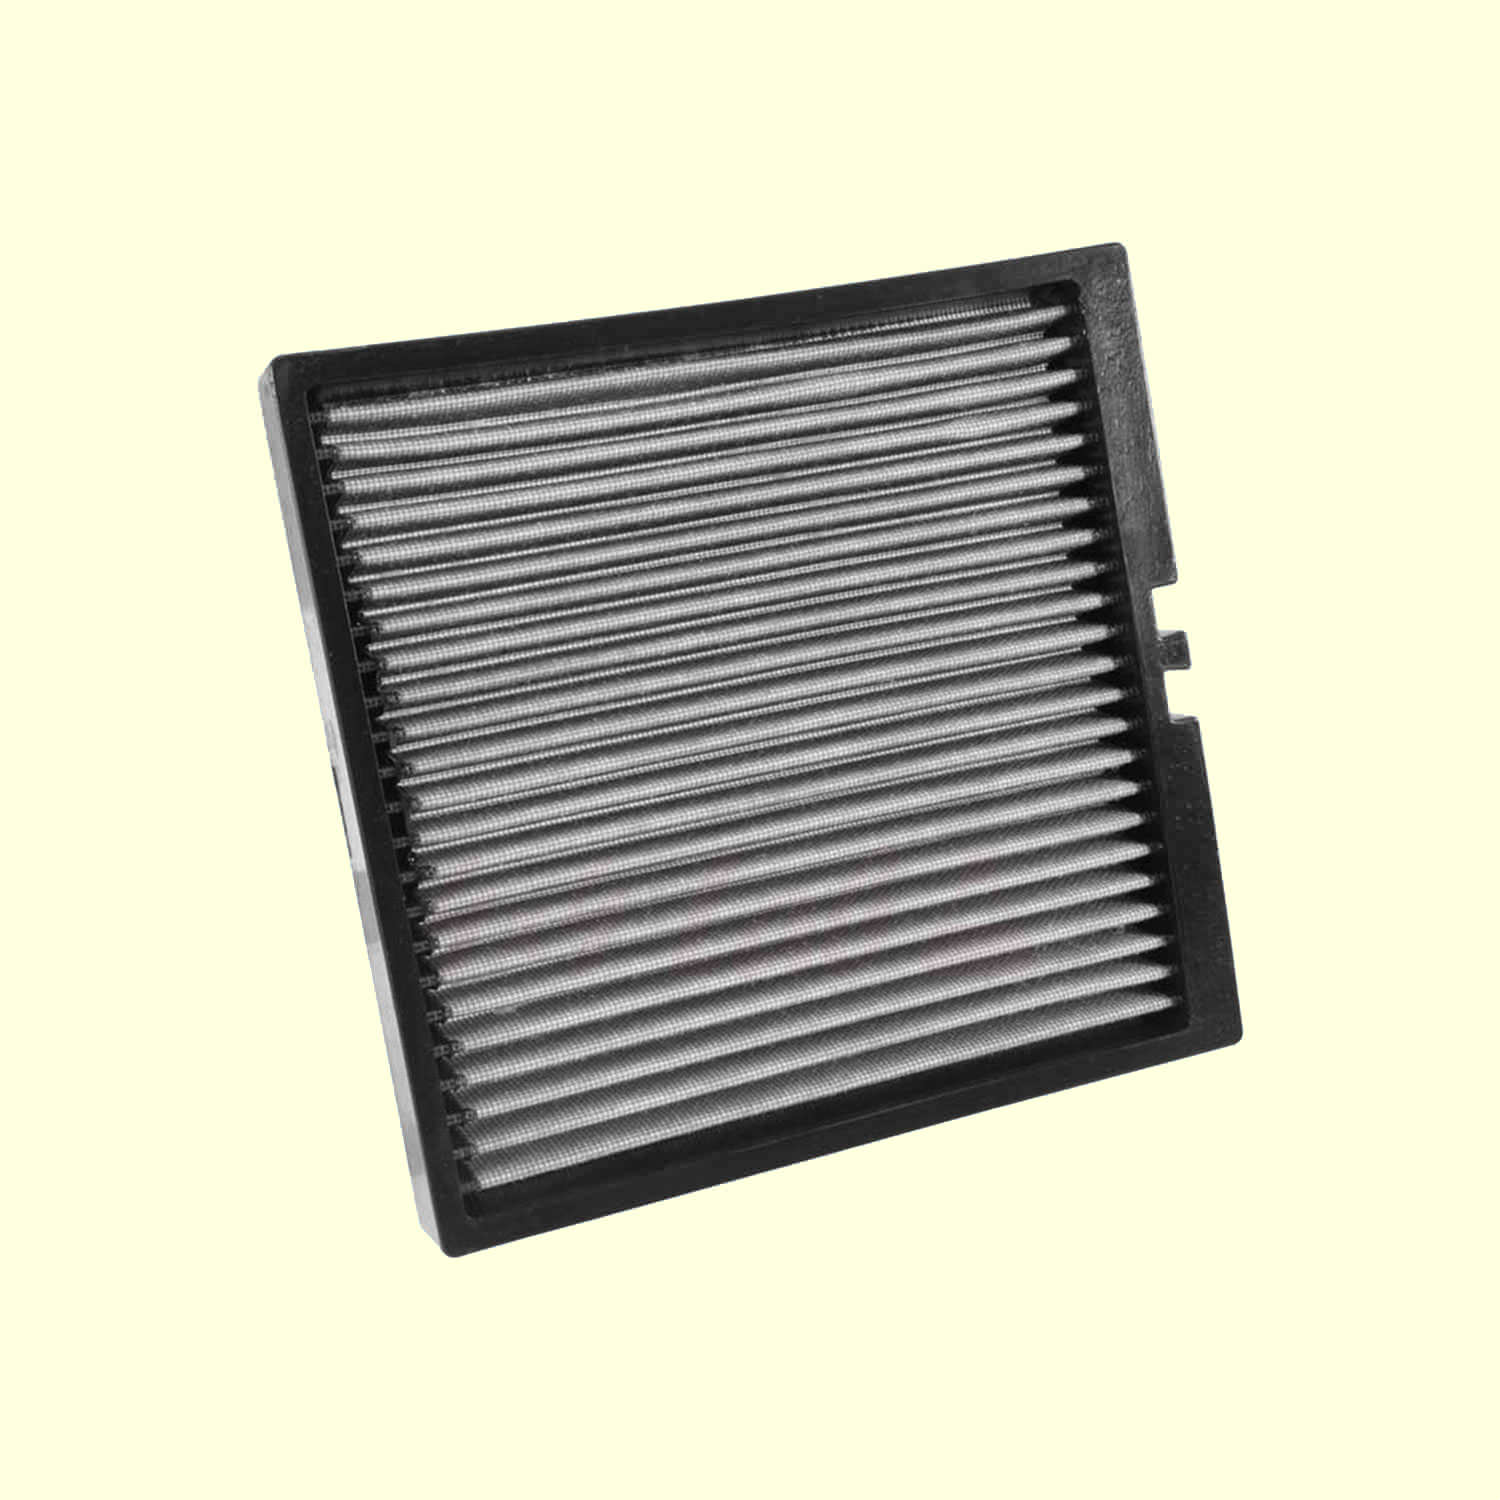 FC45654 CABIN AIR FILTER for CADILLAC  Escalade CTS STS SRX  FAST FREE SHIPPING 